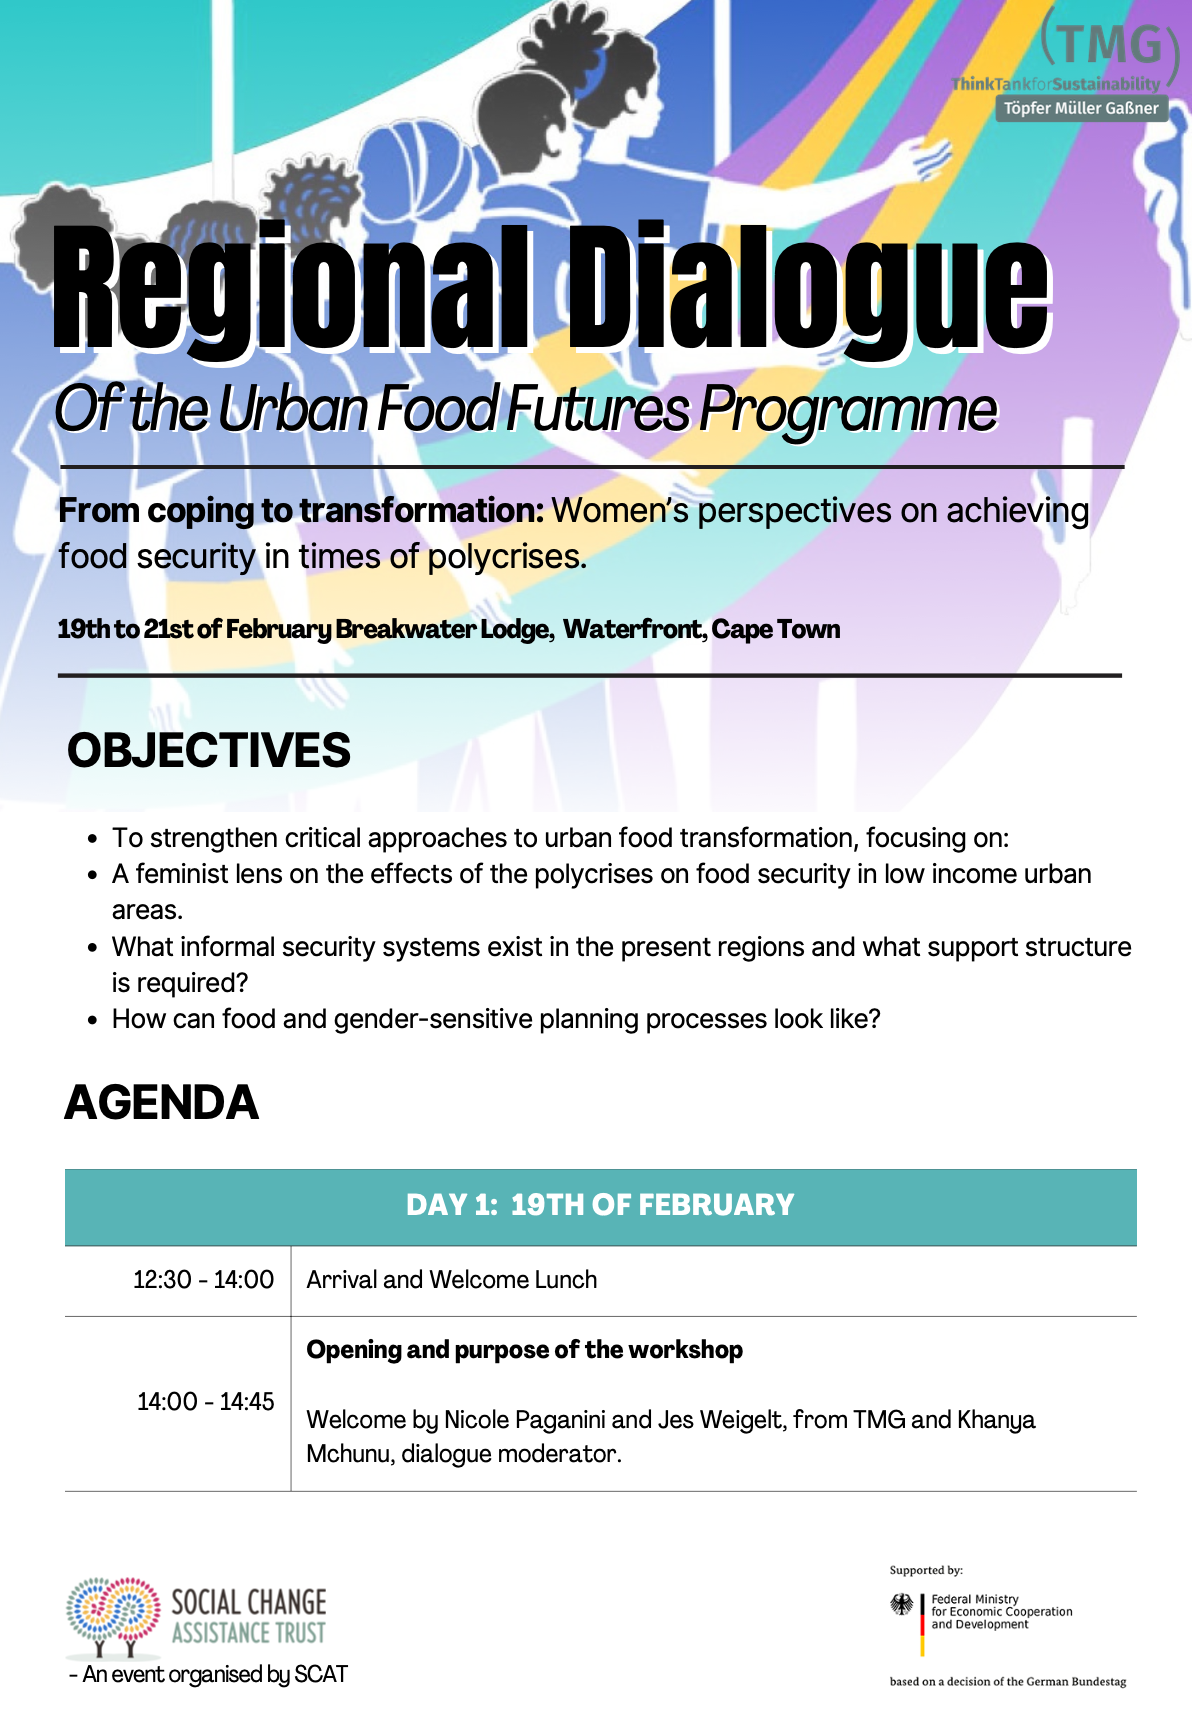 Regional Dialogue of the Urban Food Futures Programme